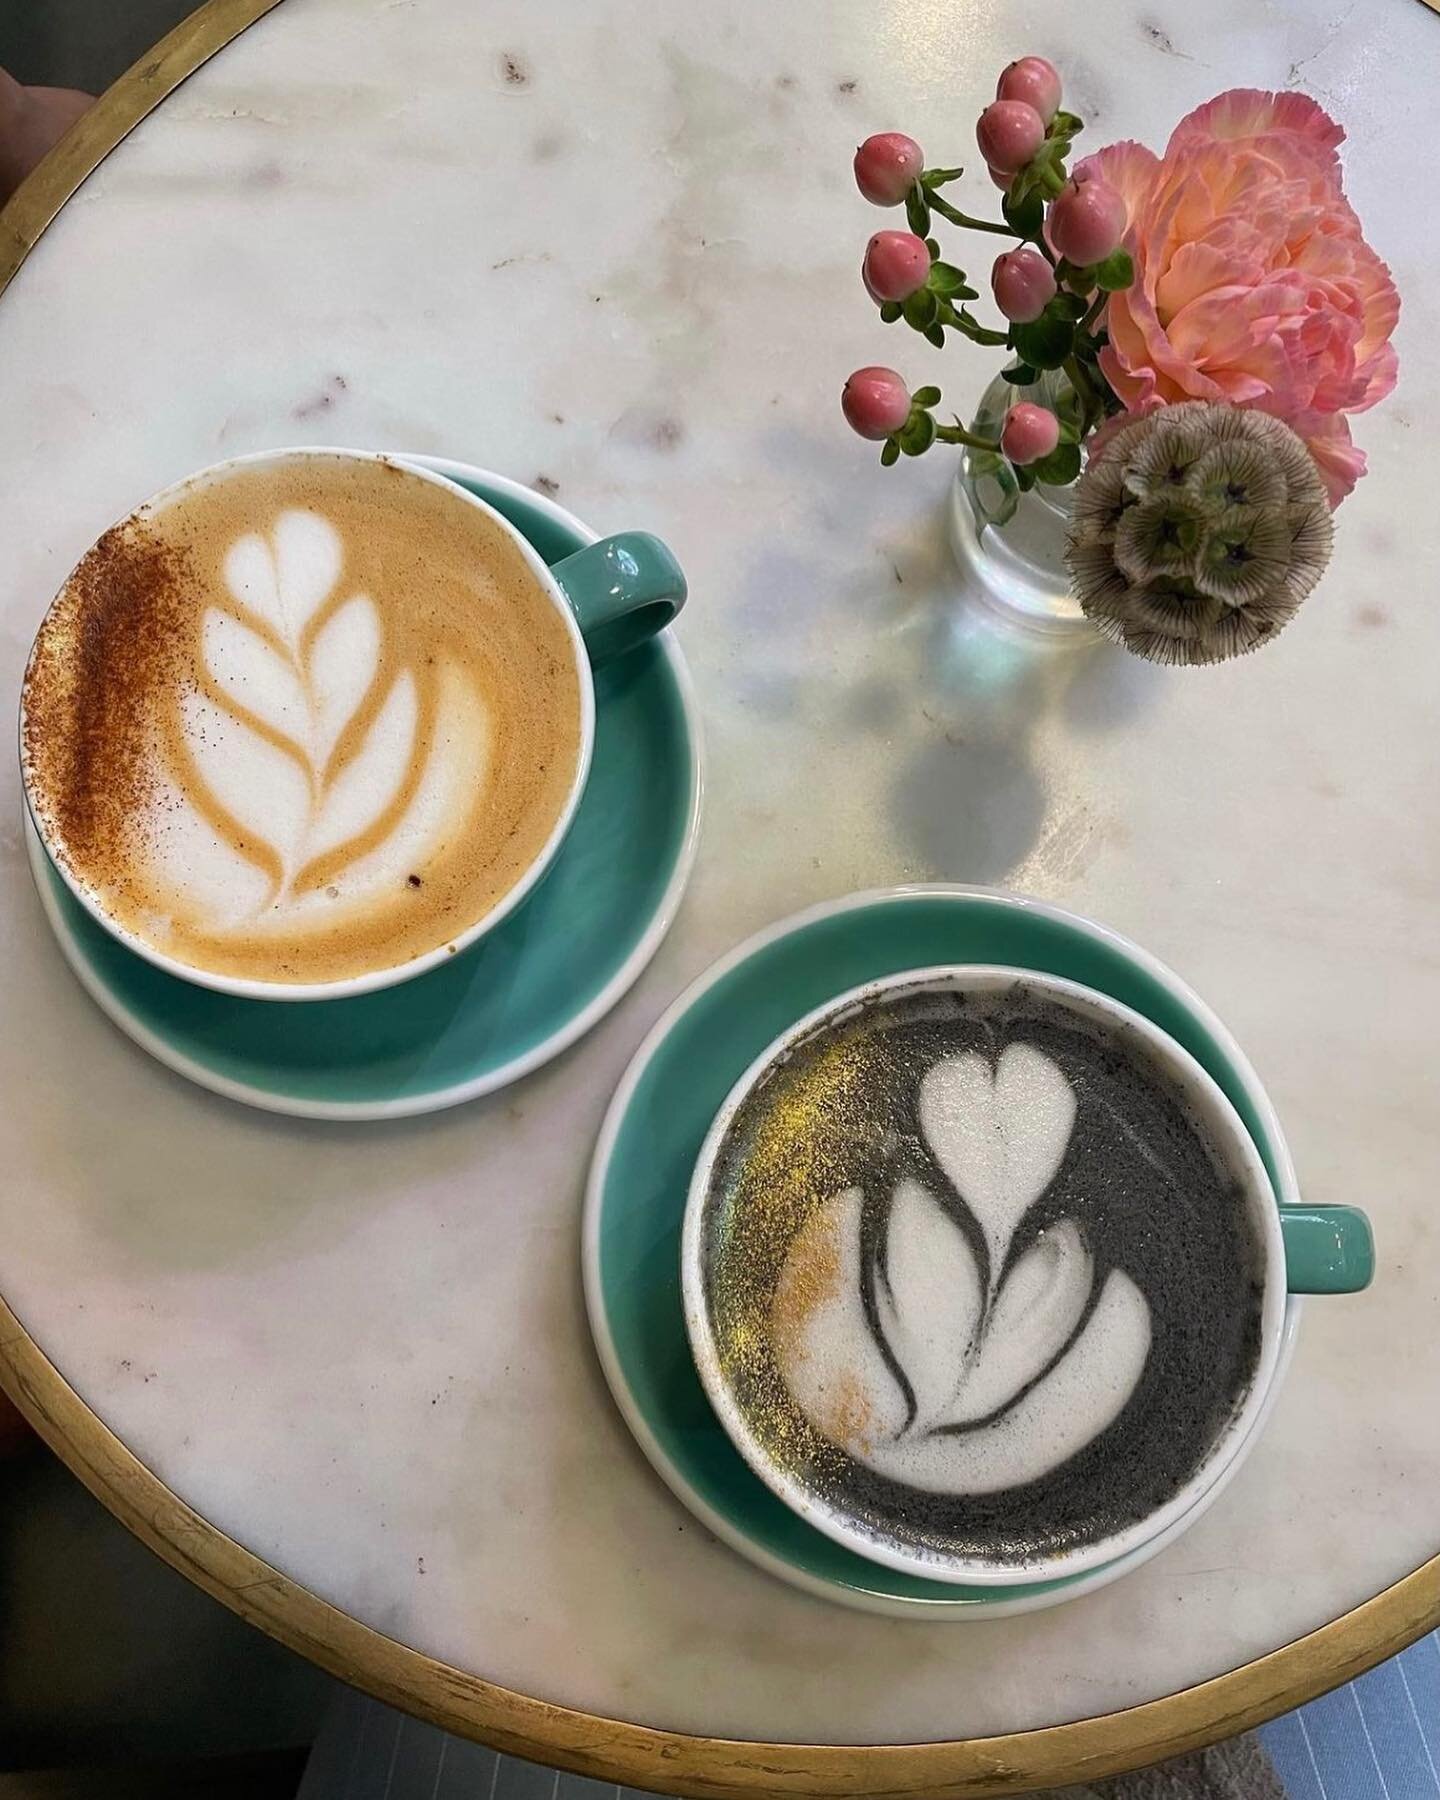 Start your Monday right! ☕️🥰
by @erikallizette